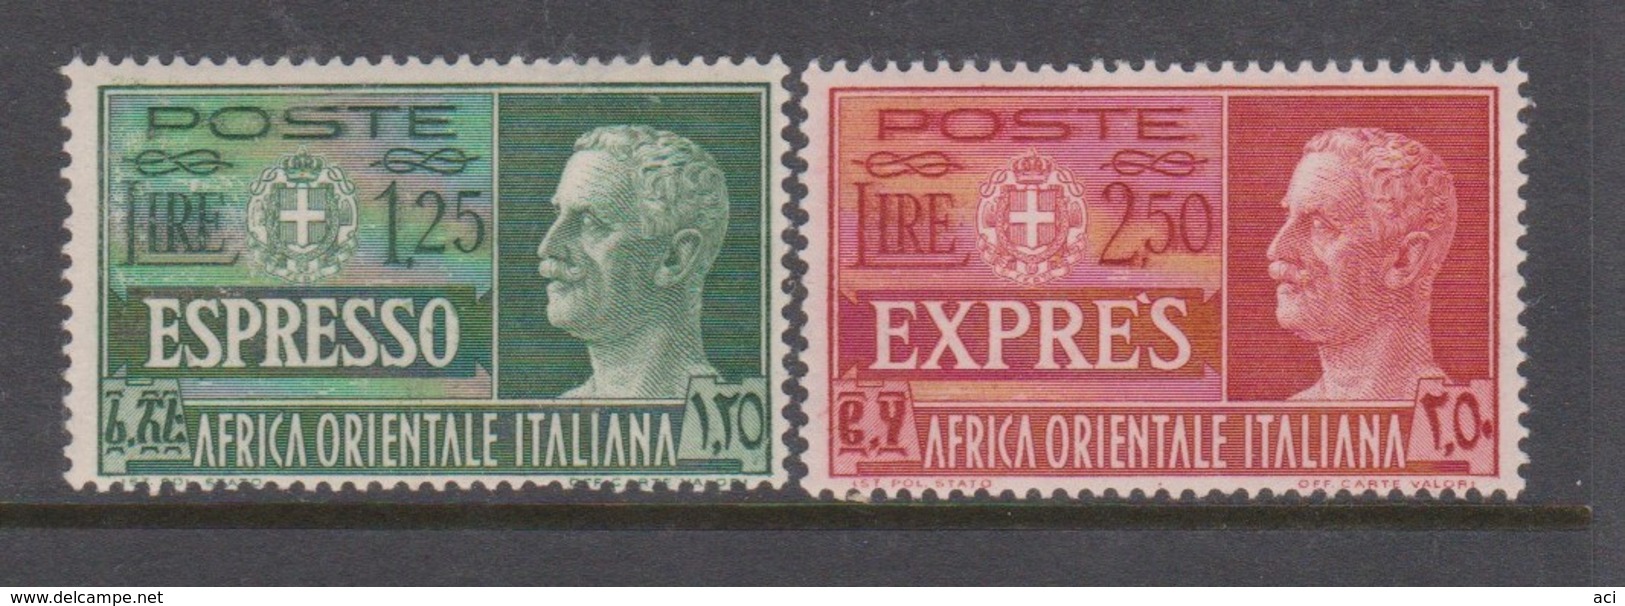 Italian Eastern Africa  SP 1-2  1938 Special Delivery Stamps,mint Never Hinged - Italian Eastern Africa